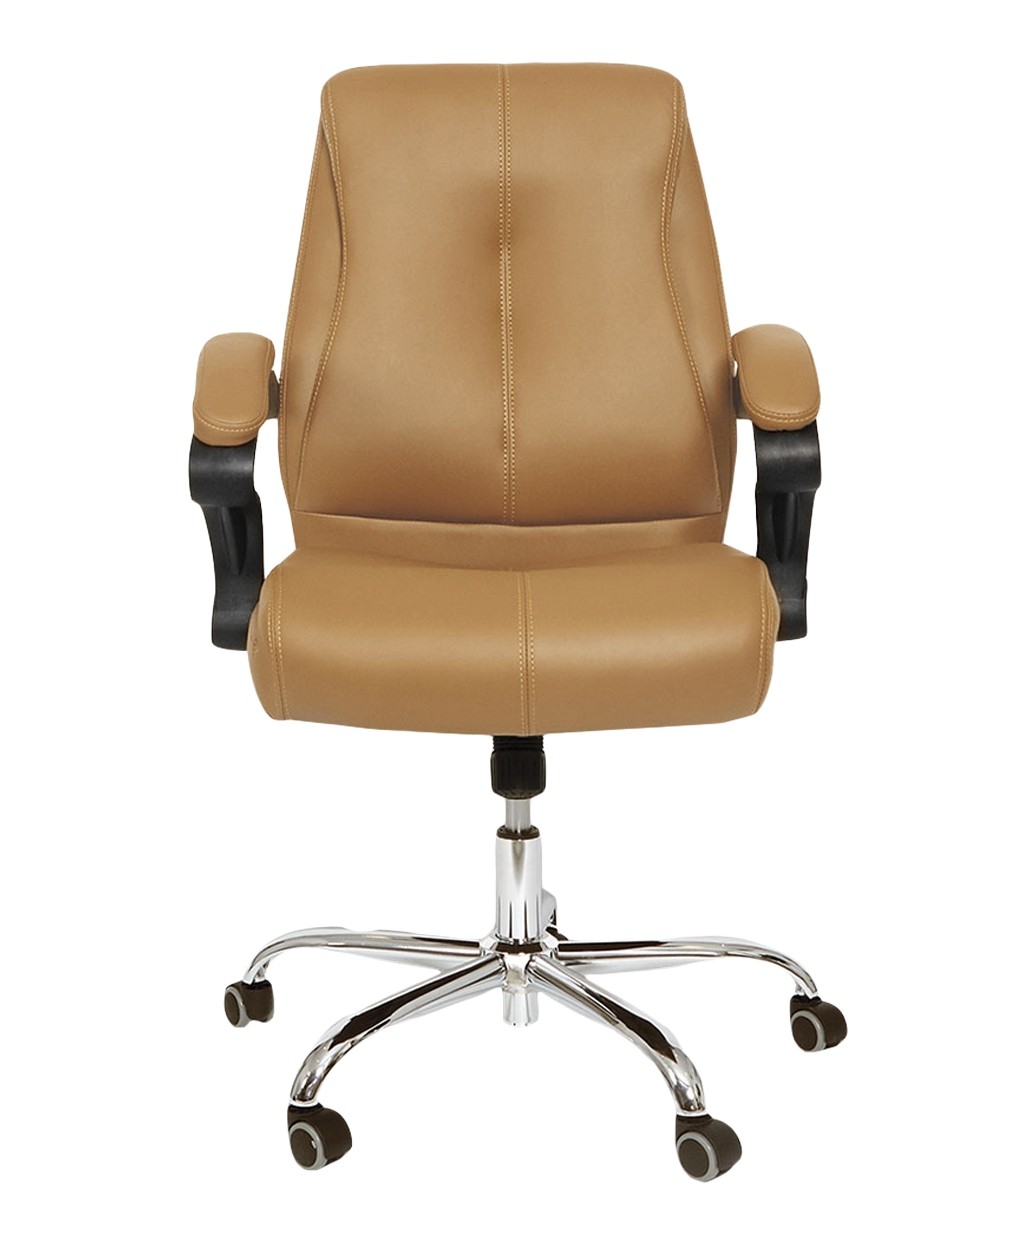 Lightweight Hydraulic Swivel Chair Reclines Into Shampoo Bowl Chair Style Salon Styling Chairs Salon Chairs